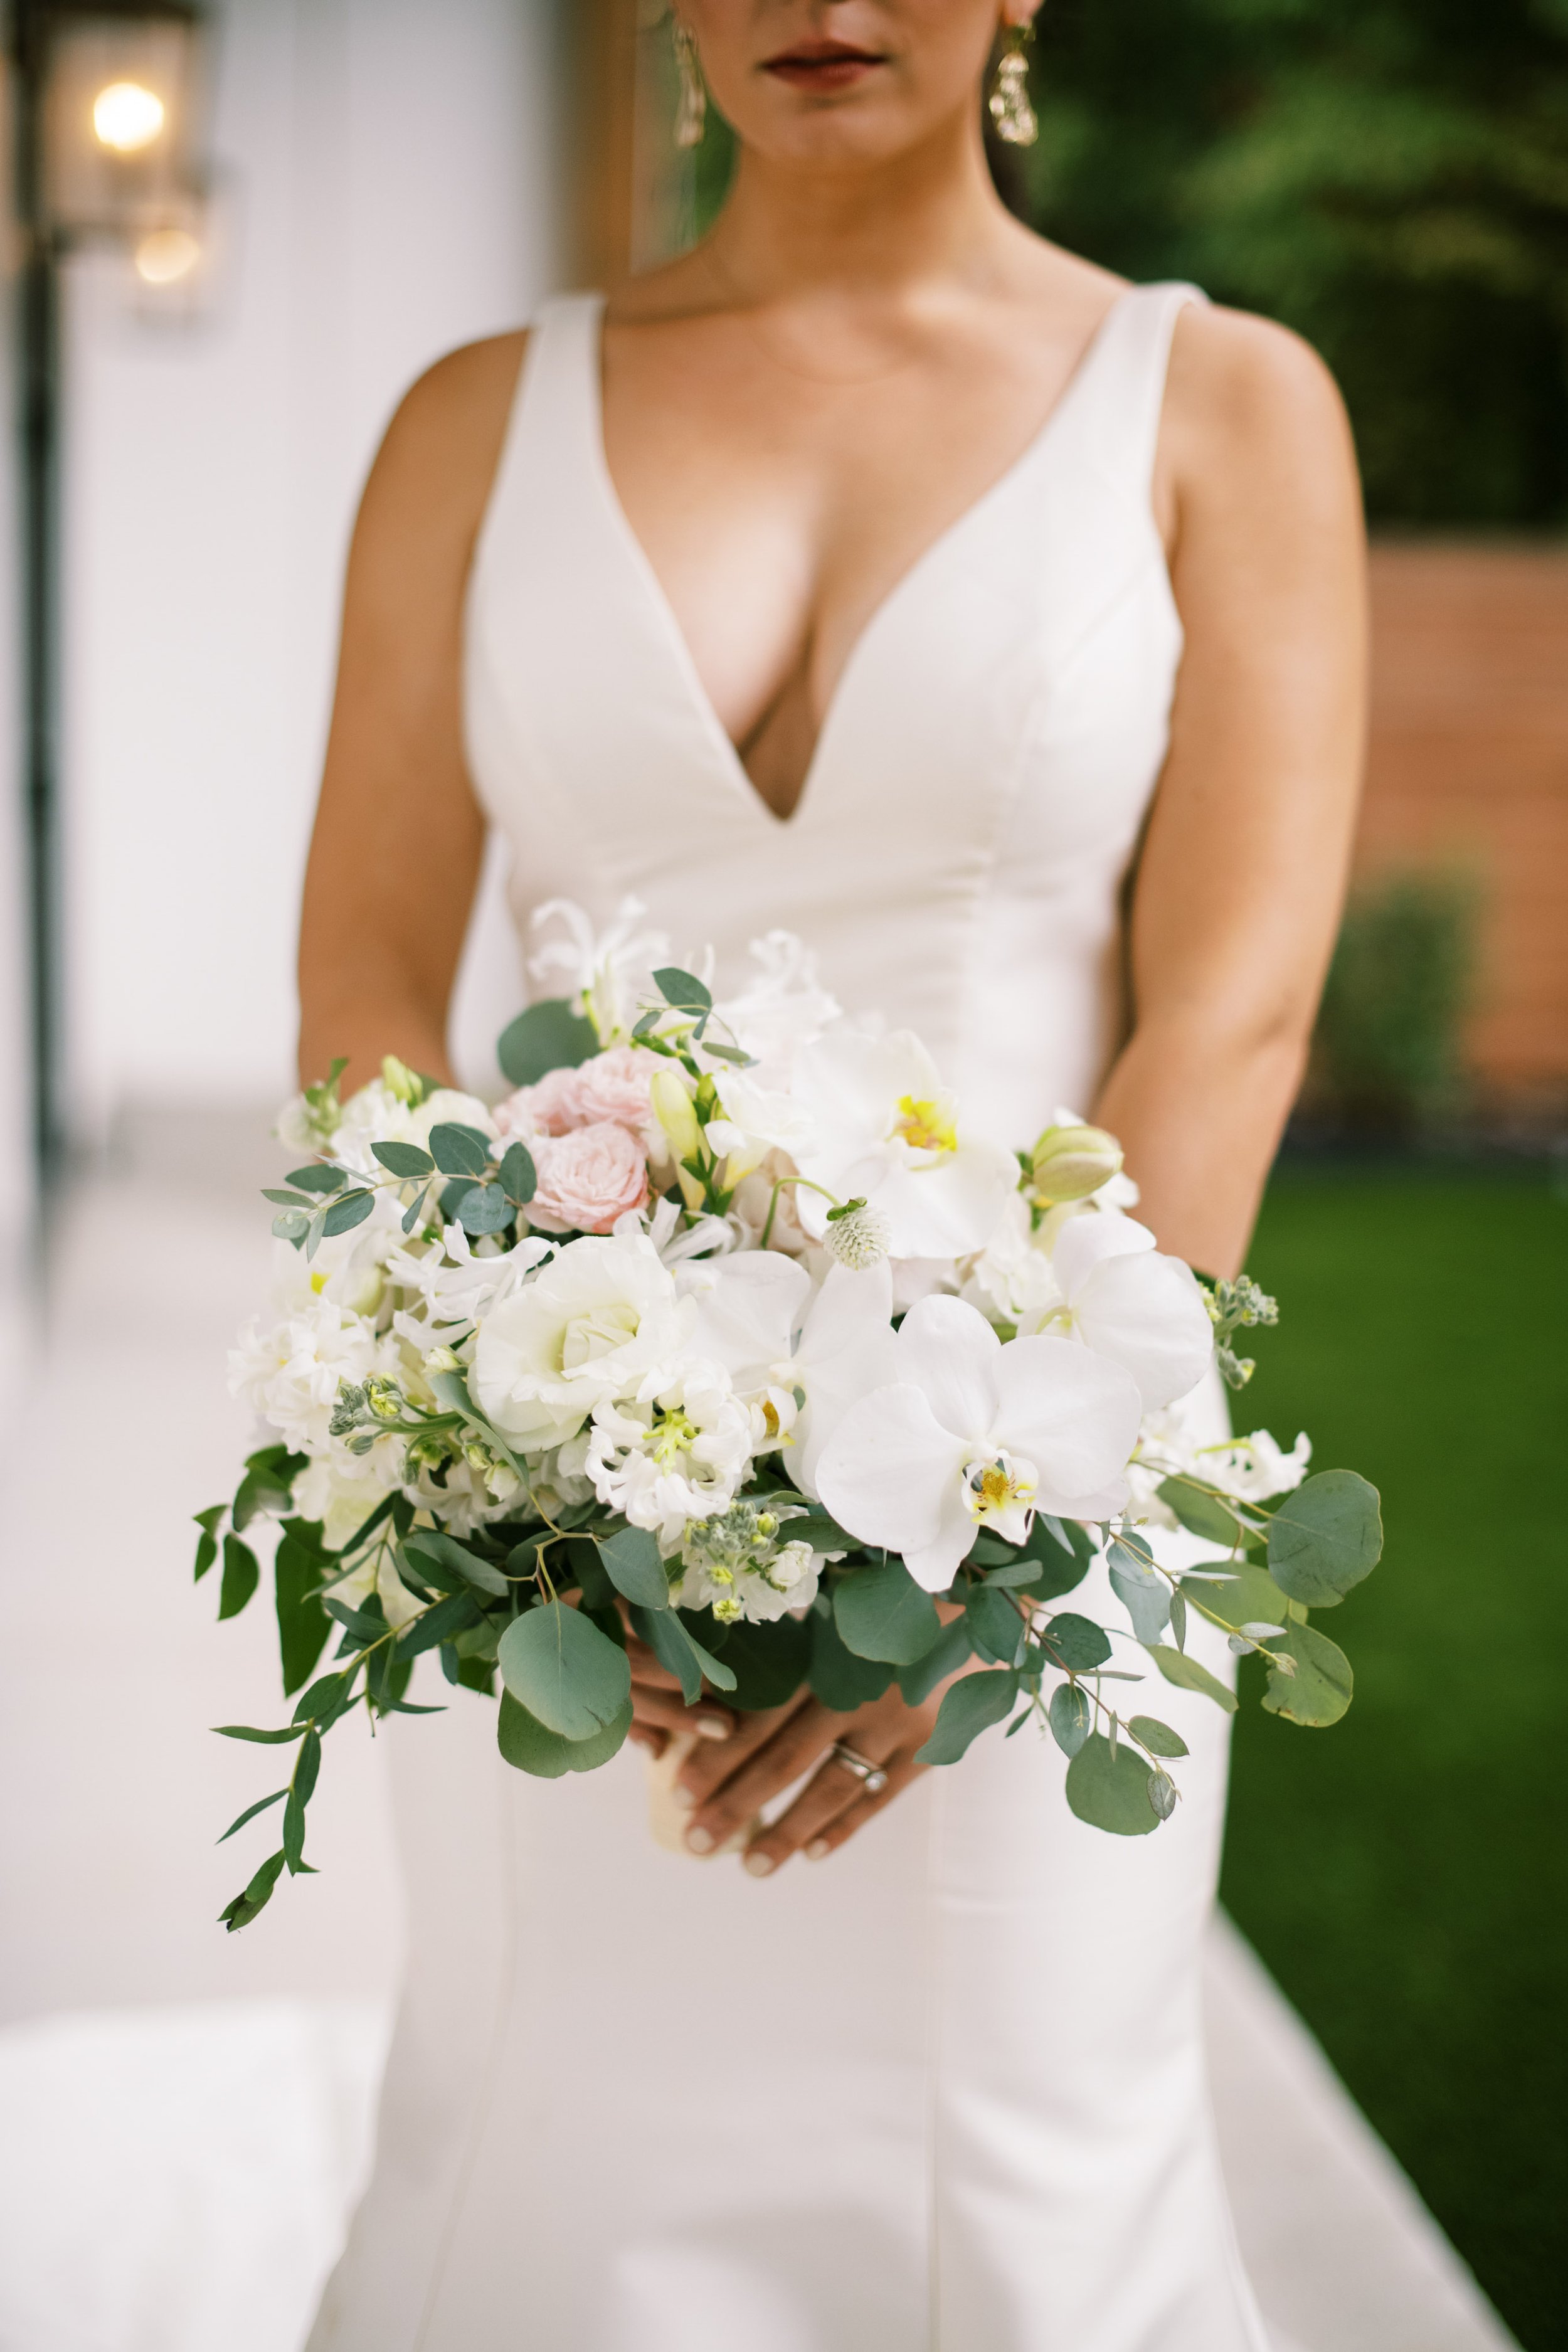 Bridal Bouquet and Wedding Dress Colorful Wedding Inspiration at The Bradford NC Wedding Venue Fancy This Photography